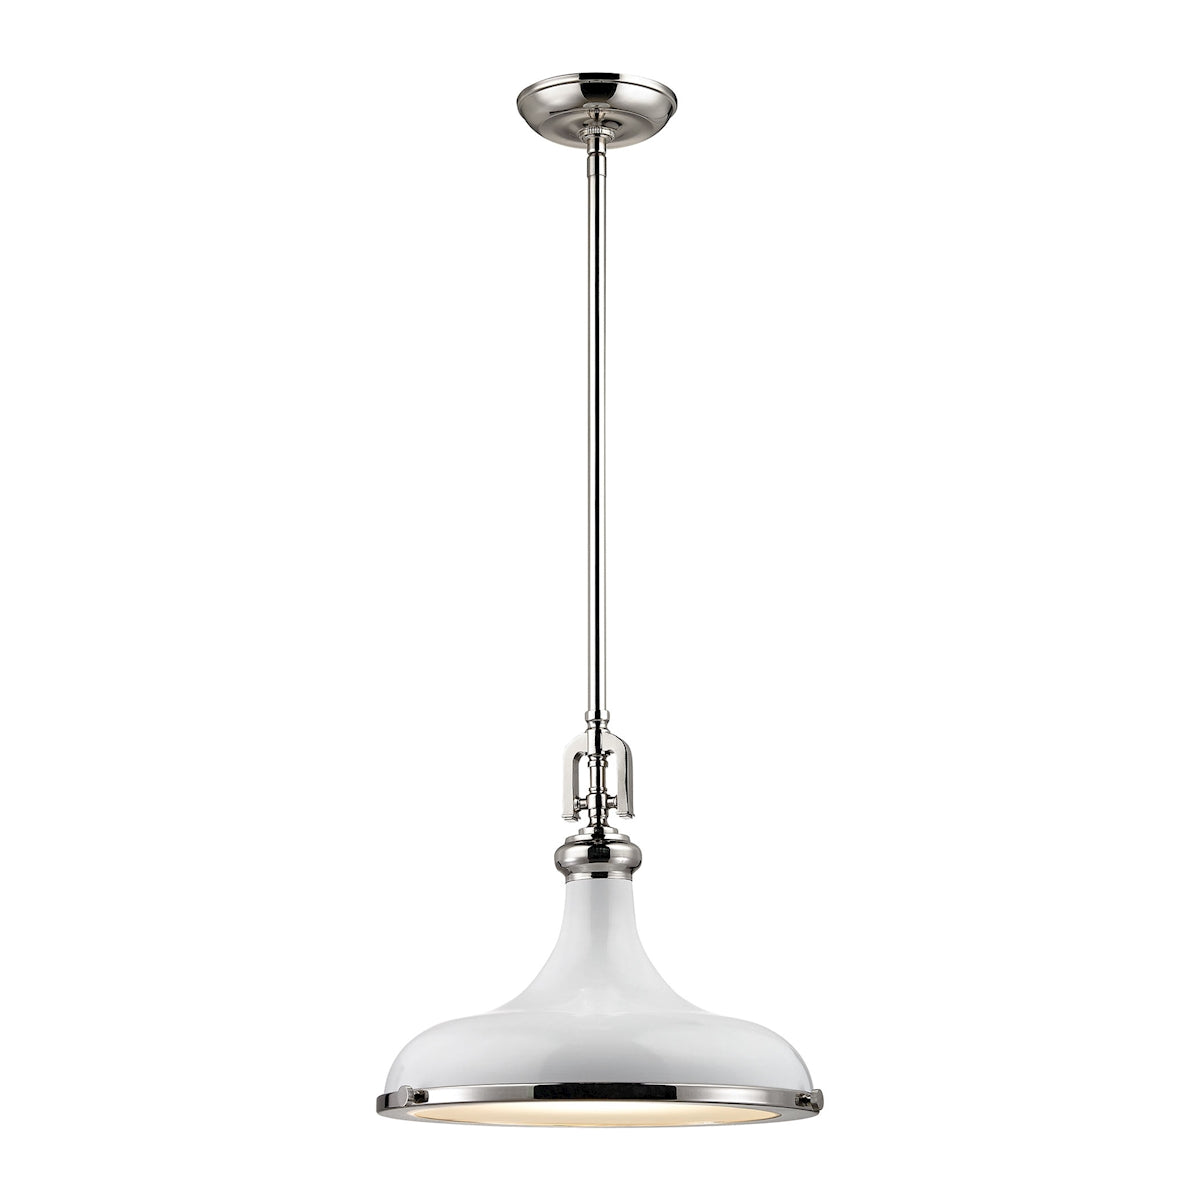 ELK Lighting 57041/1 - Rutherford 15" Wide 1-Light Pendant in Polished Nickel with Gloss White Shade